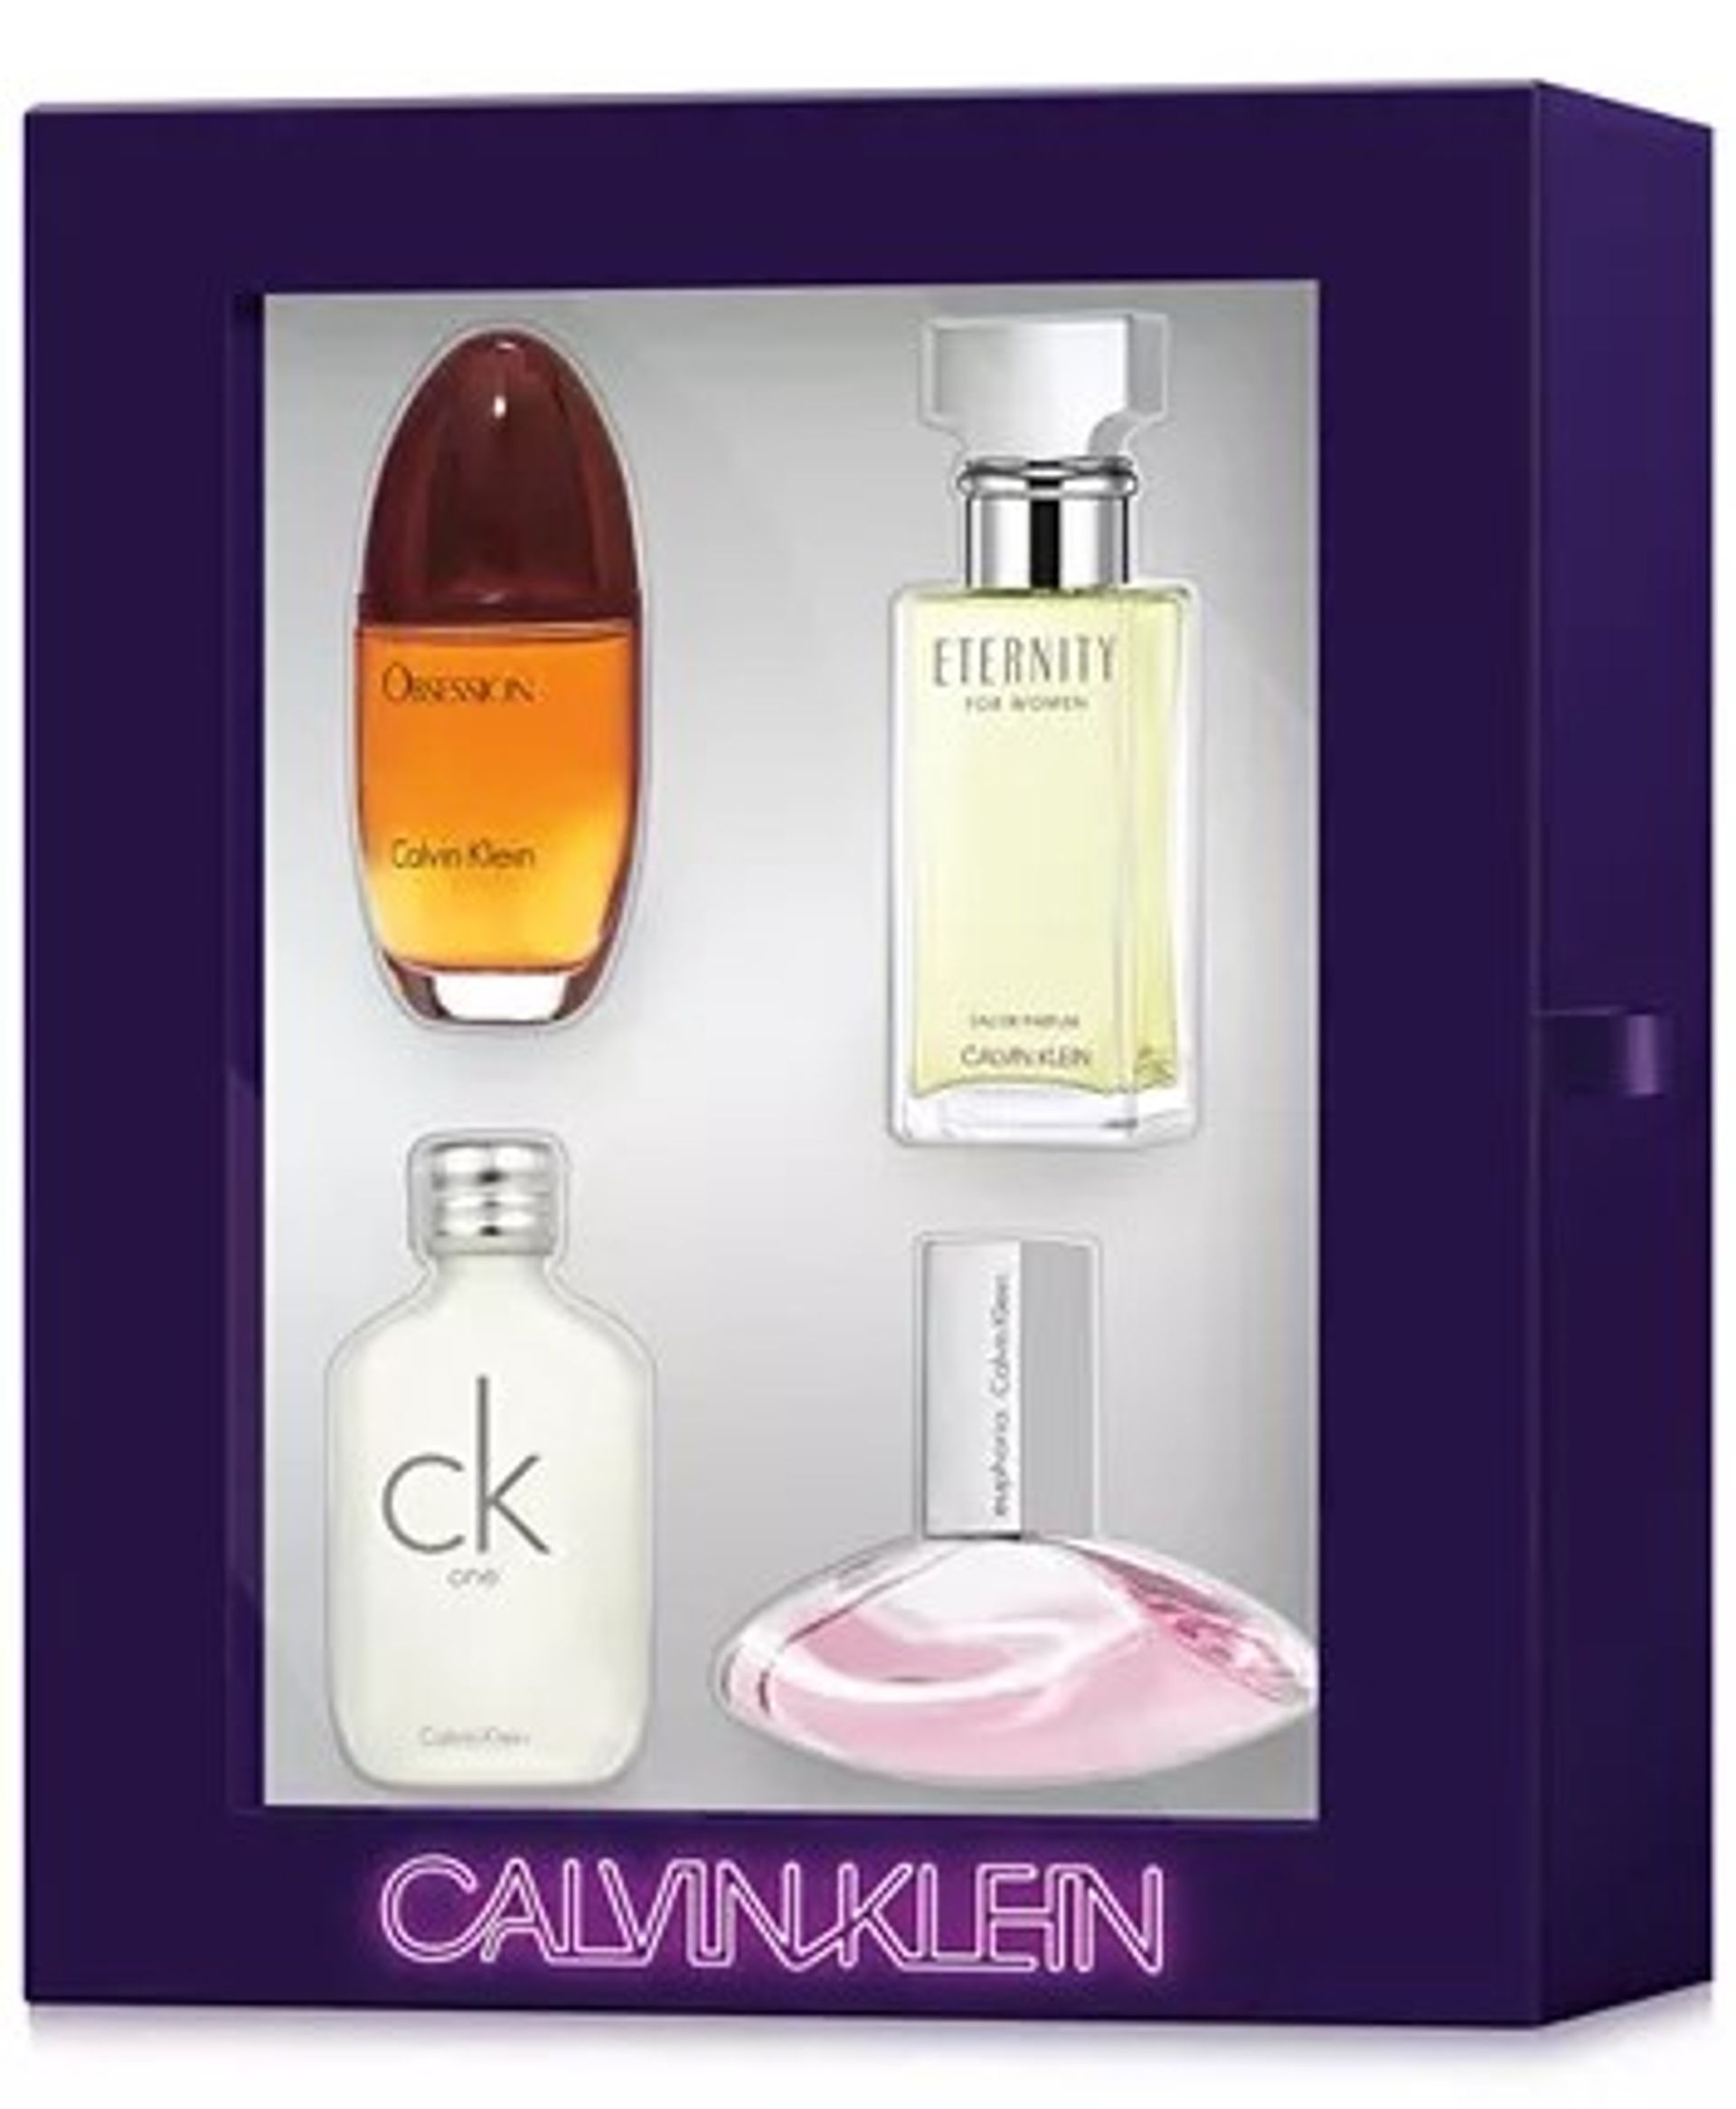 Calvin Klein products for sale